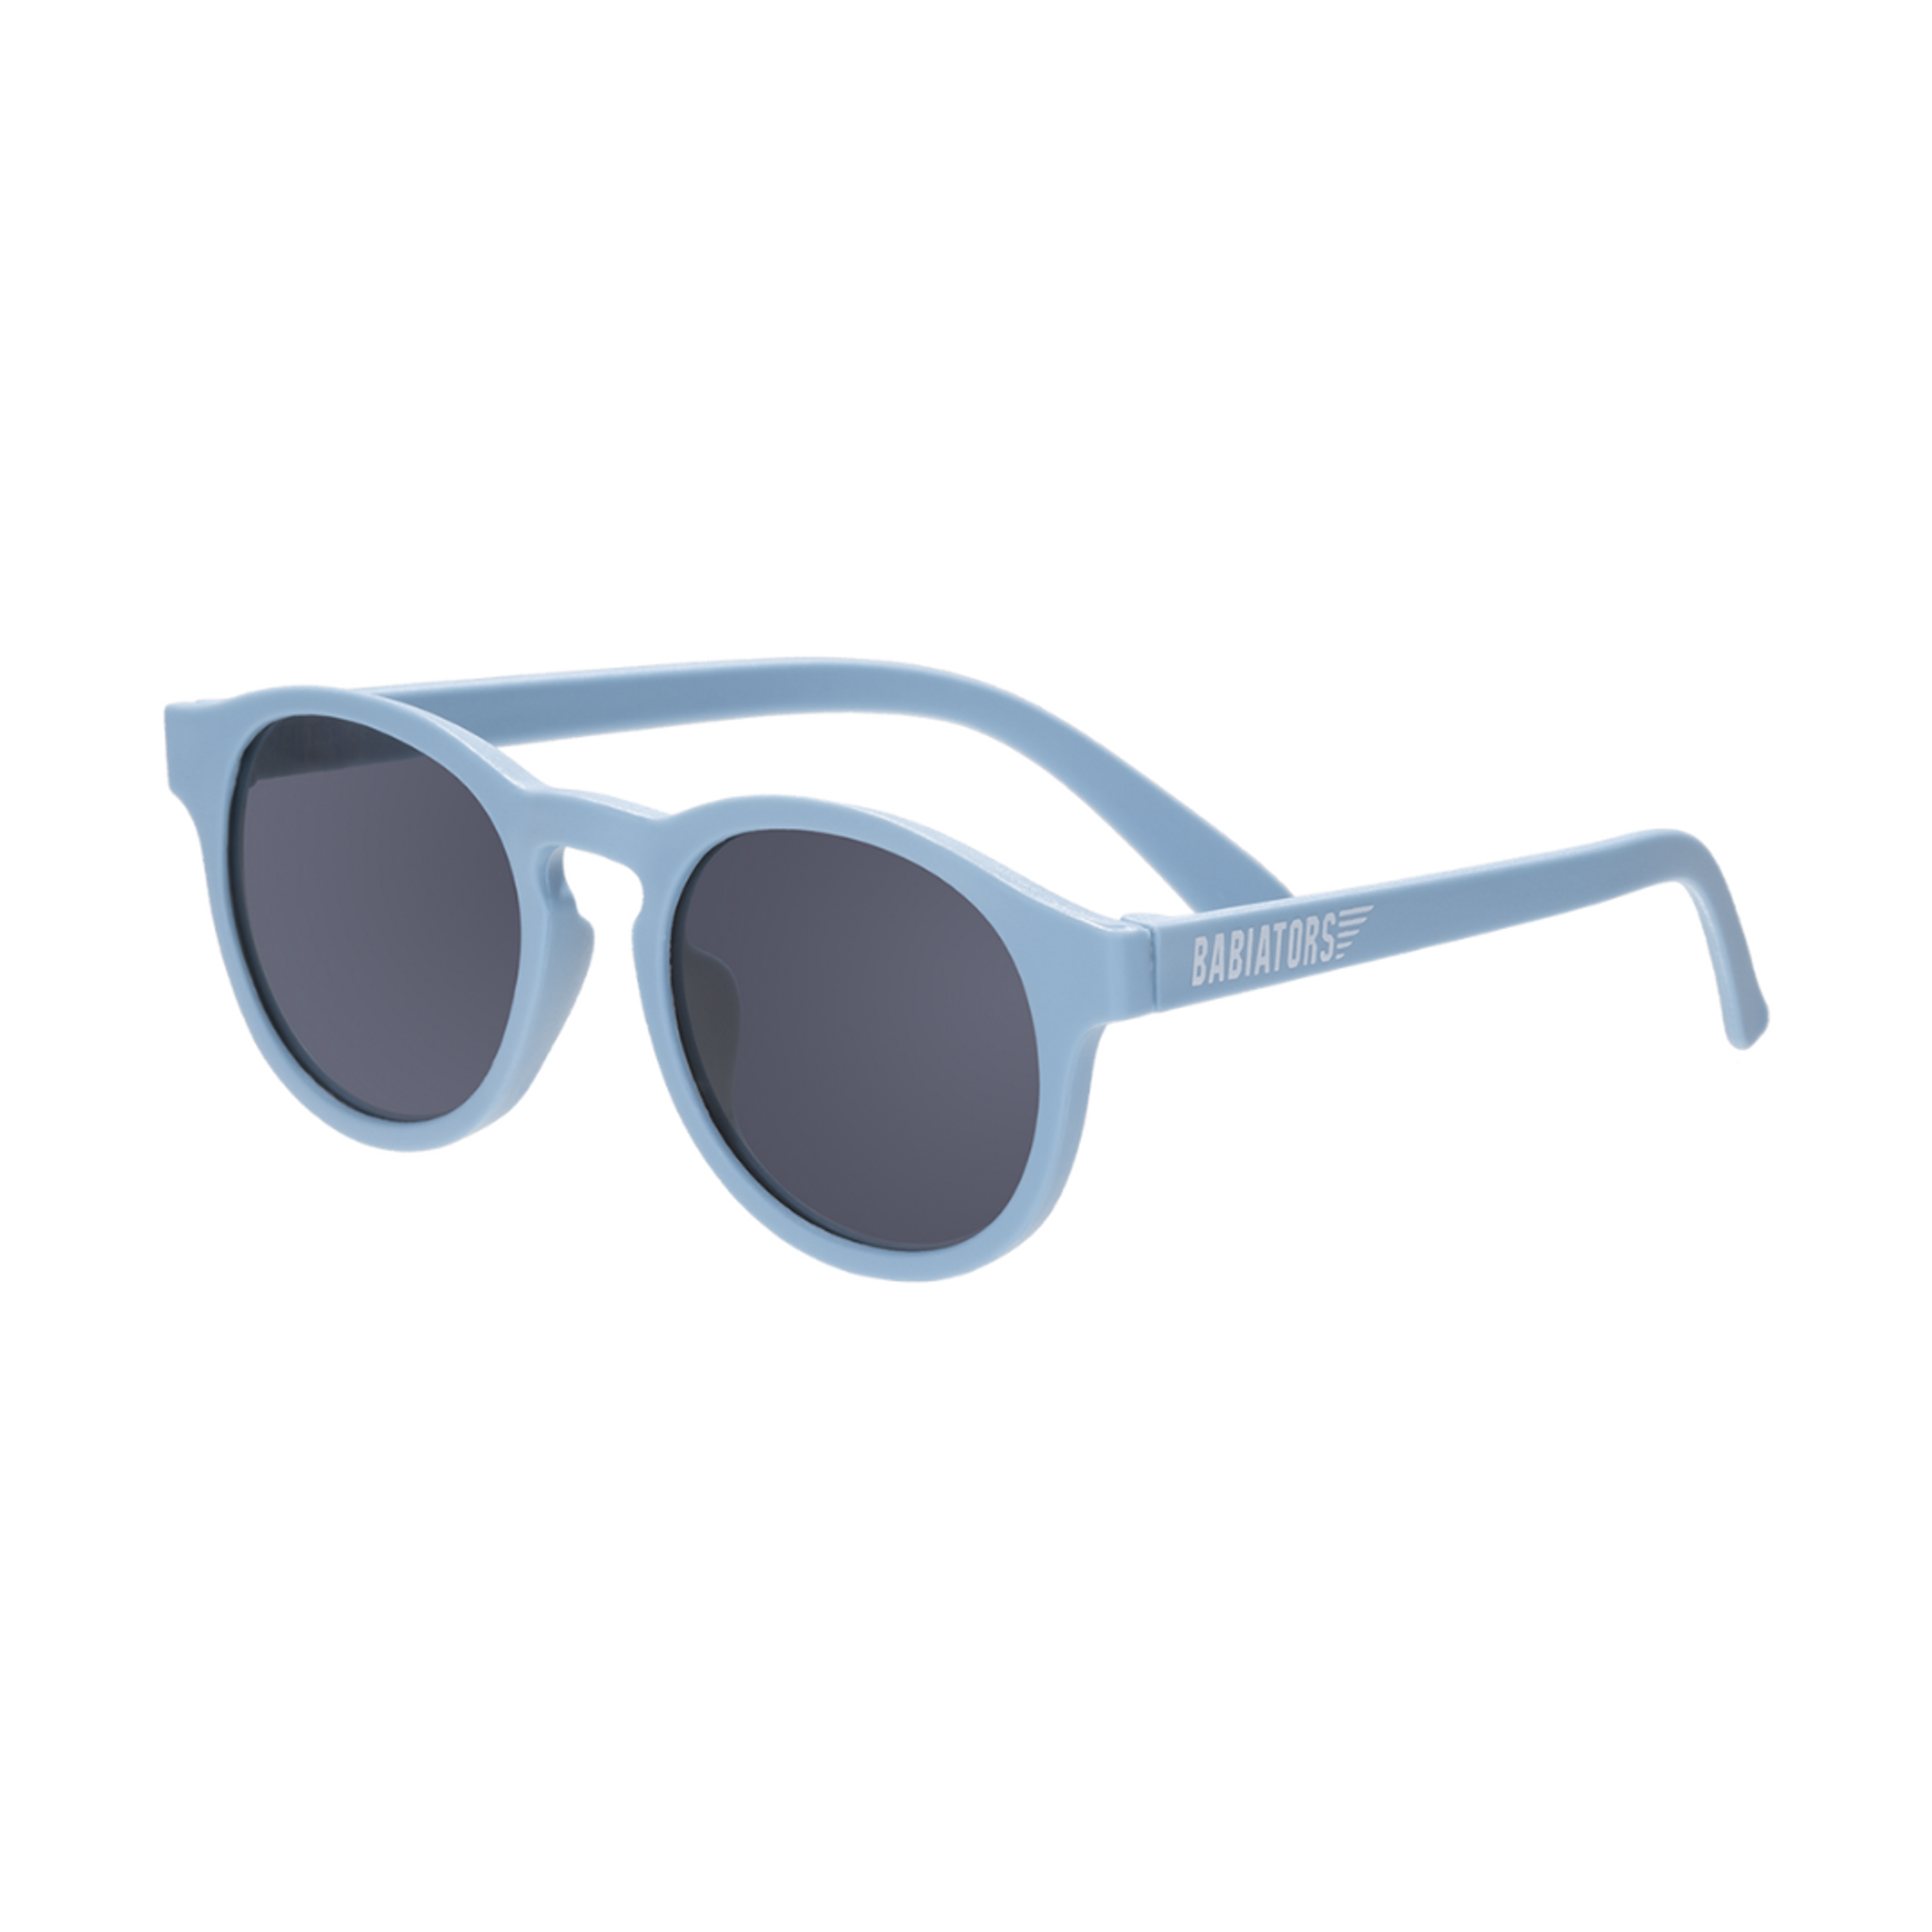 Babiators Keyhole Sunglasses - Up in the Air Blue